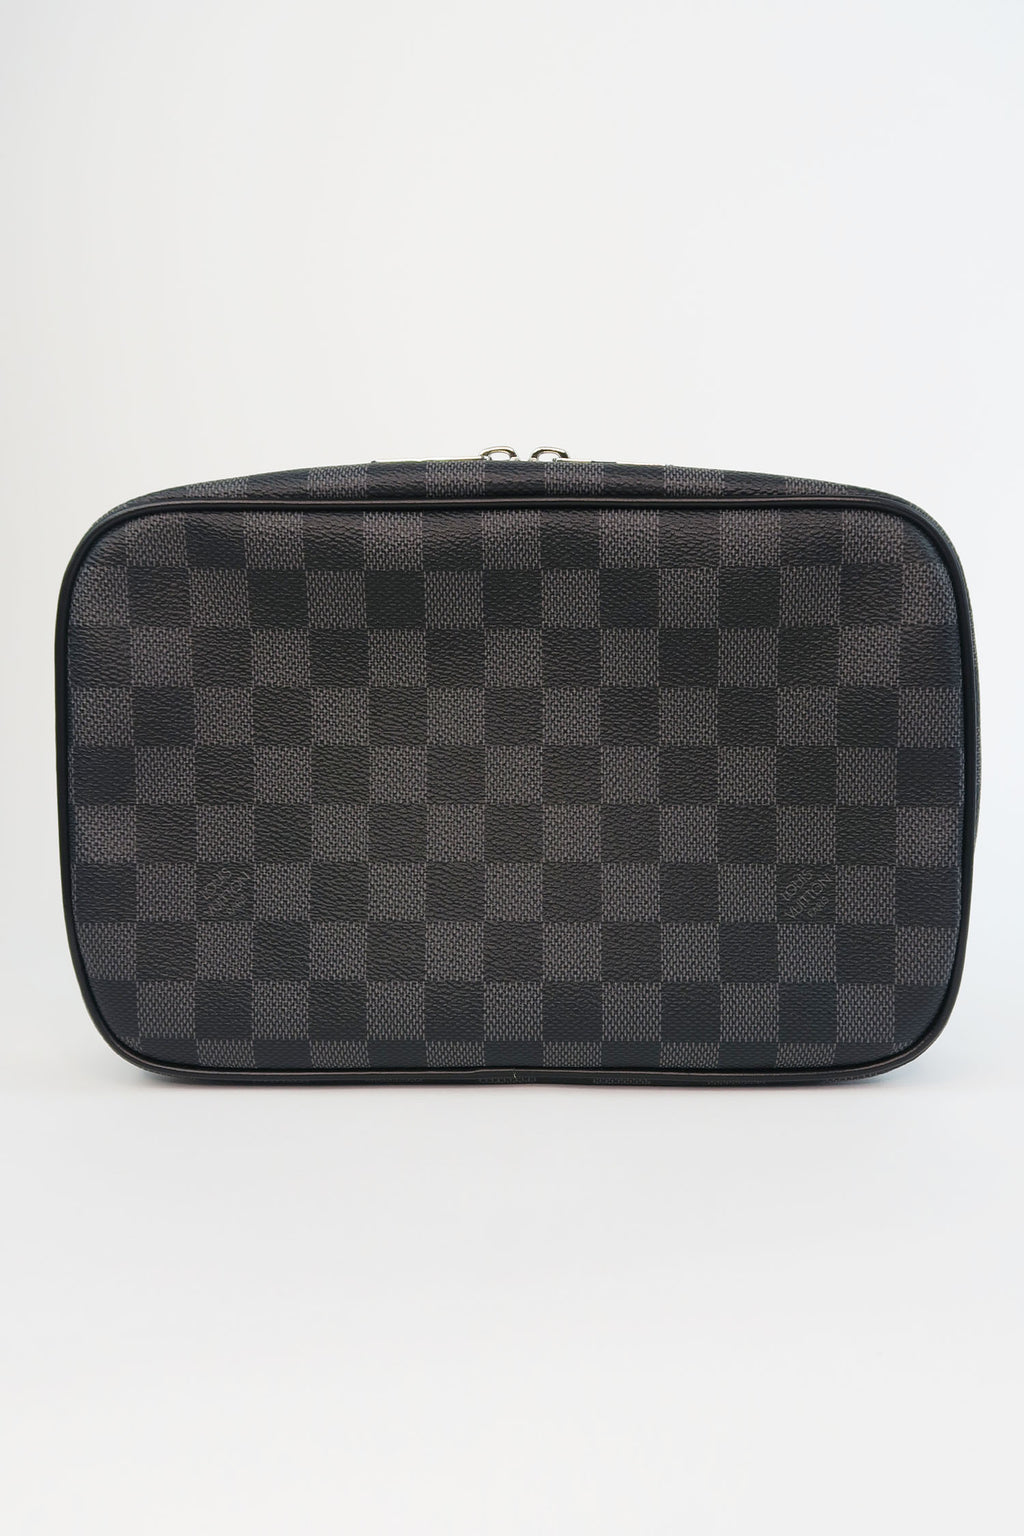 This Louis Vuitton Toletry Pouch in Damier Graphite canvas will protect  your shaving tools and treatments.